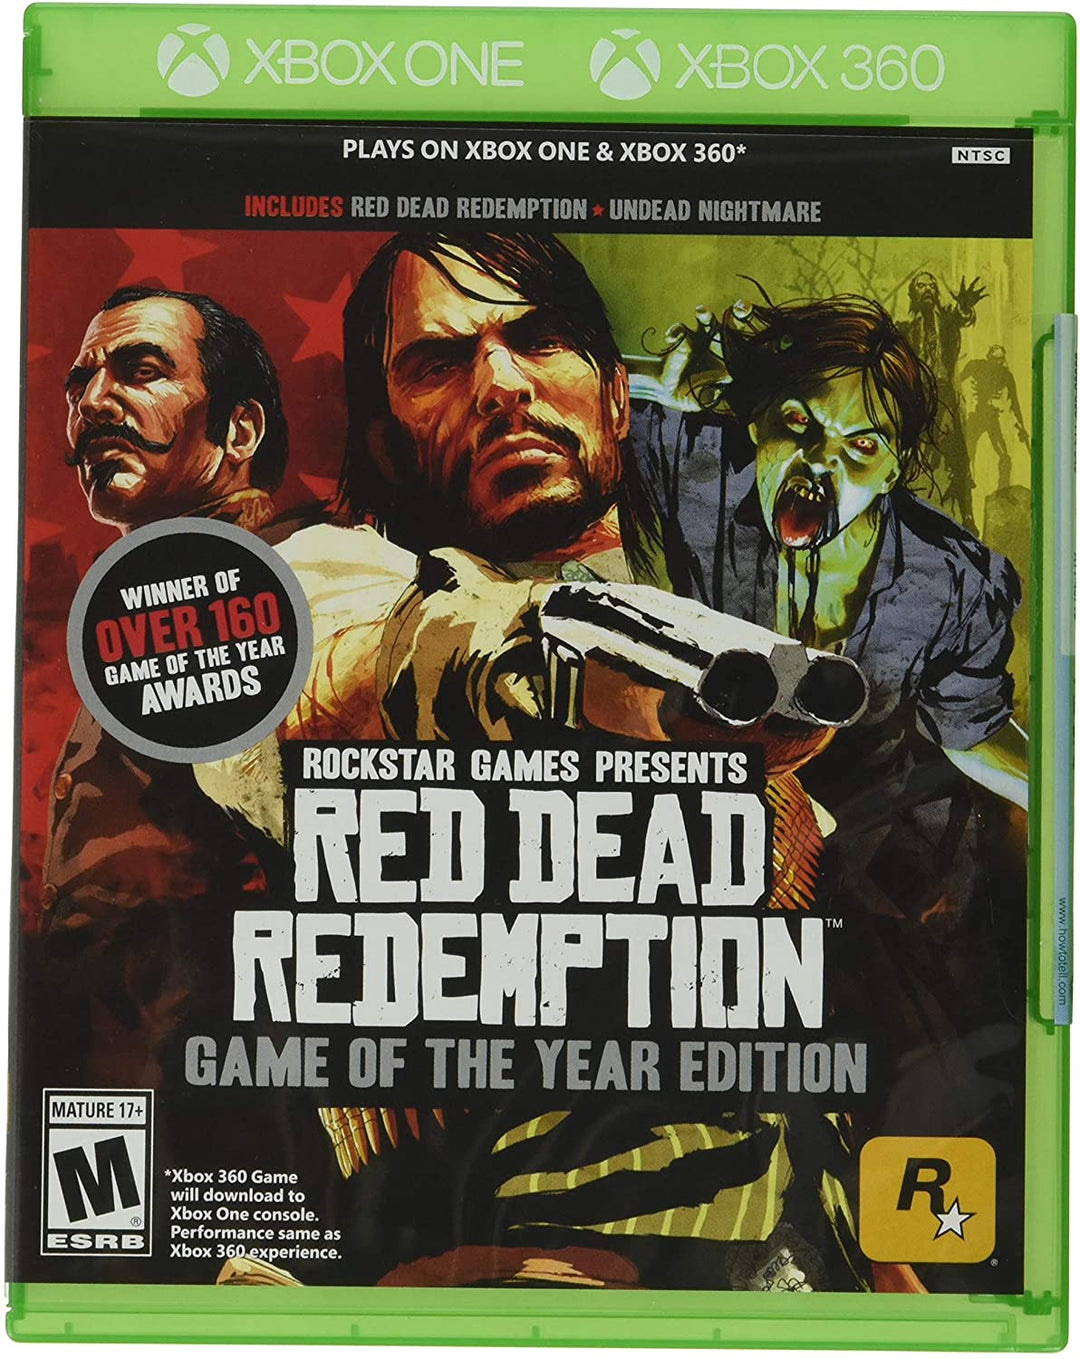 Red Dead Redemption: Game of the Year Edition - Xbox 360 by Rockstar Games